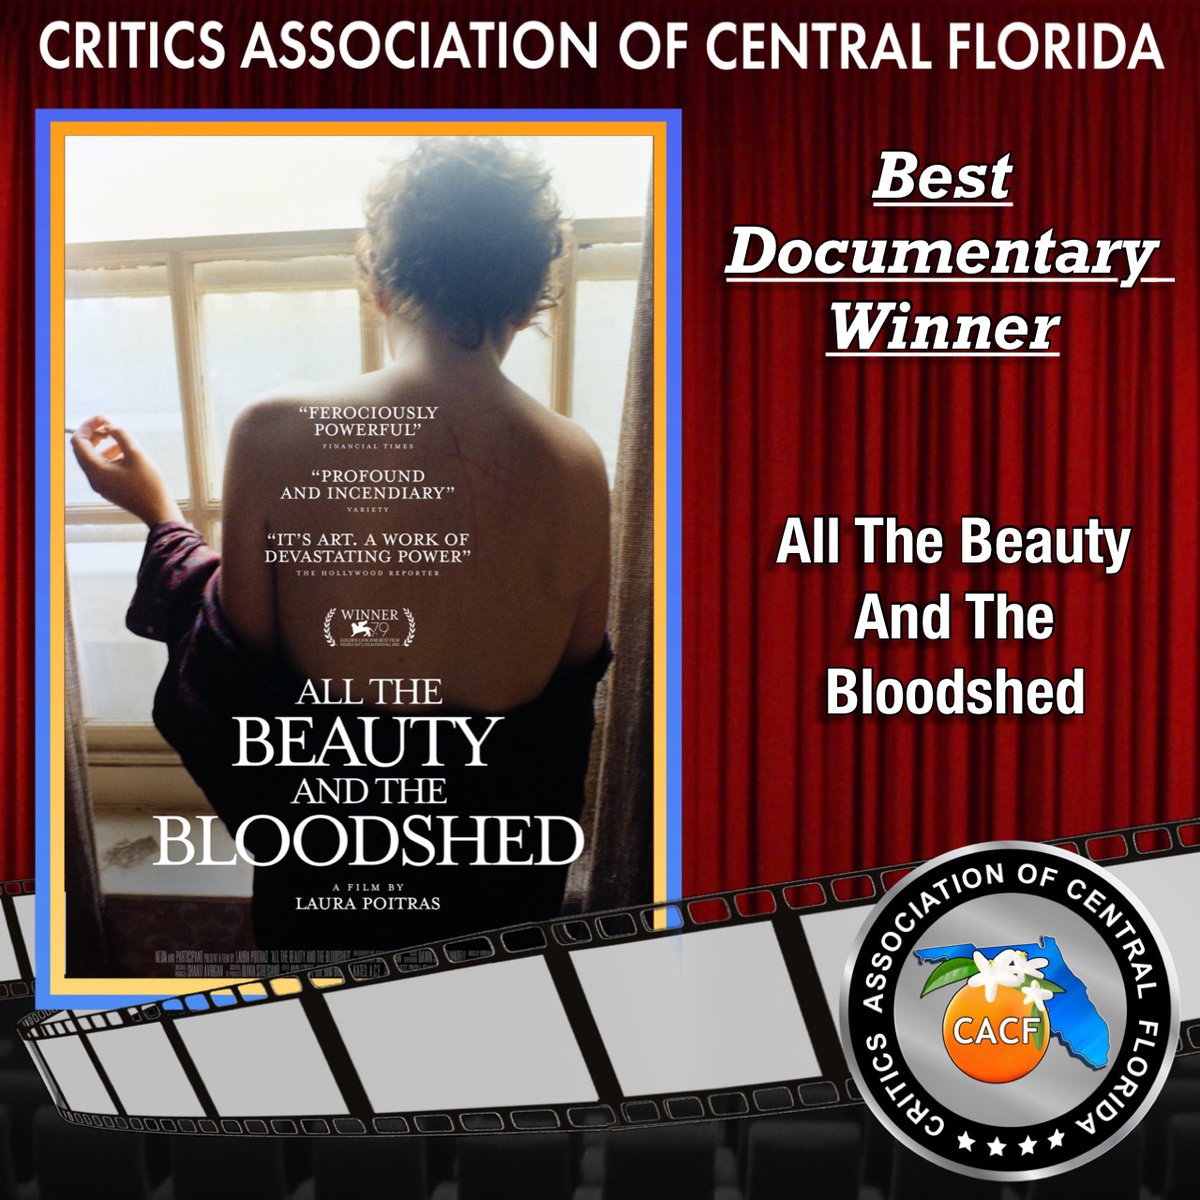 Best Documentary Winner: All the Beauty and the Bloodshed 

#AlltheBeautyandtheBloodshed @neonrated @AltitudeFilms #CACF2022